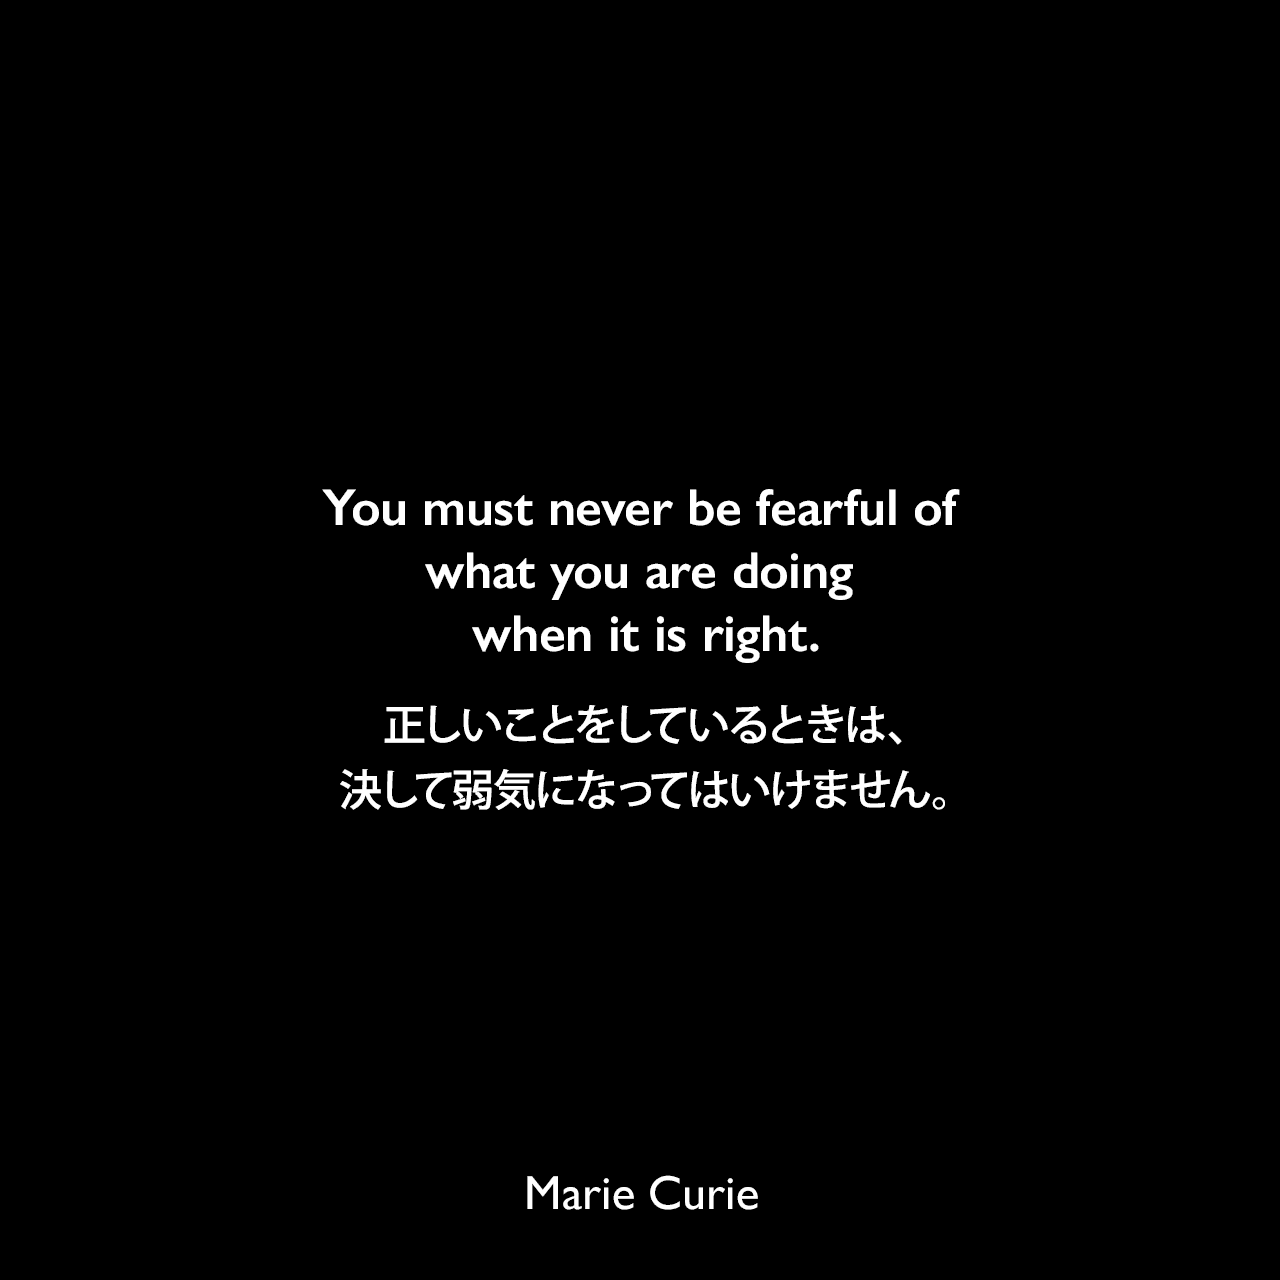 You must never be fearful of what you are doing when it is right.正しいことをしているときは、決して弱気になってはいけません。Marie Curie